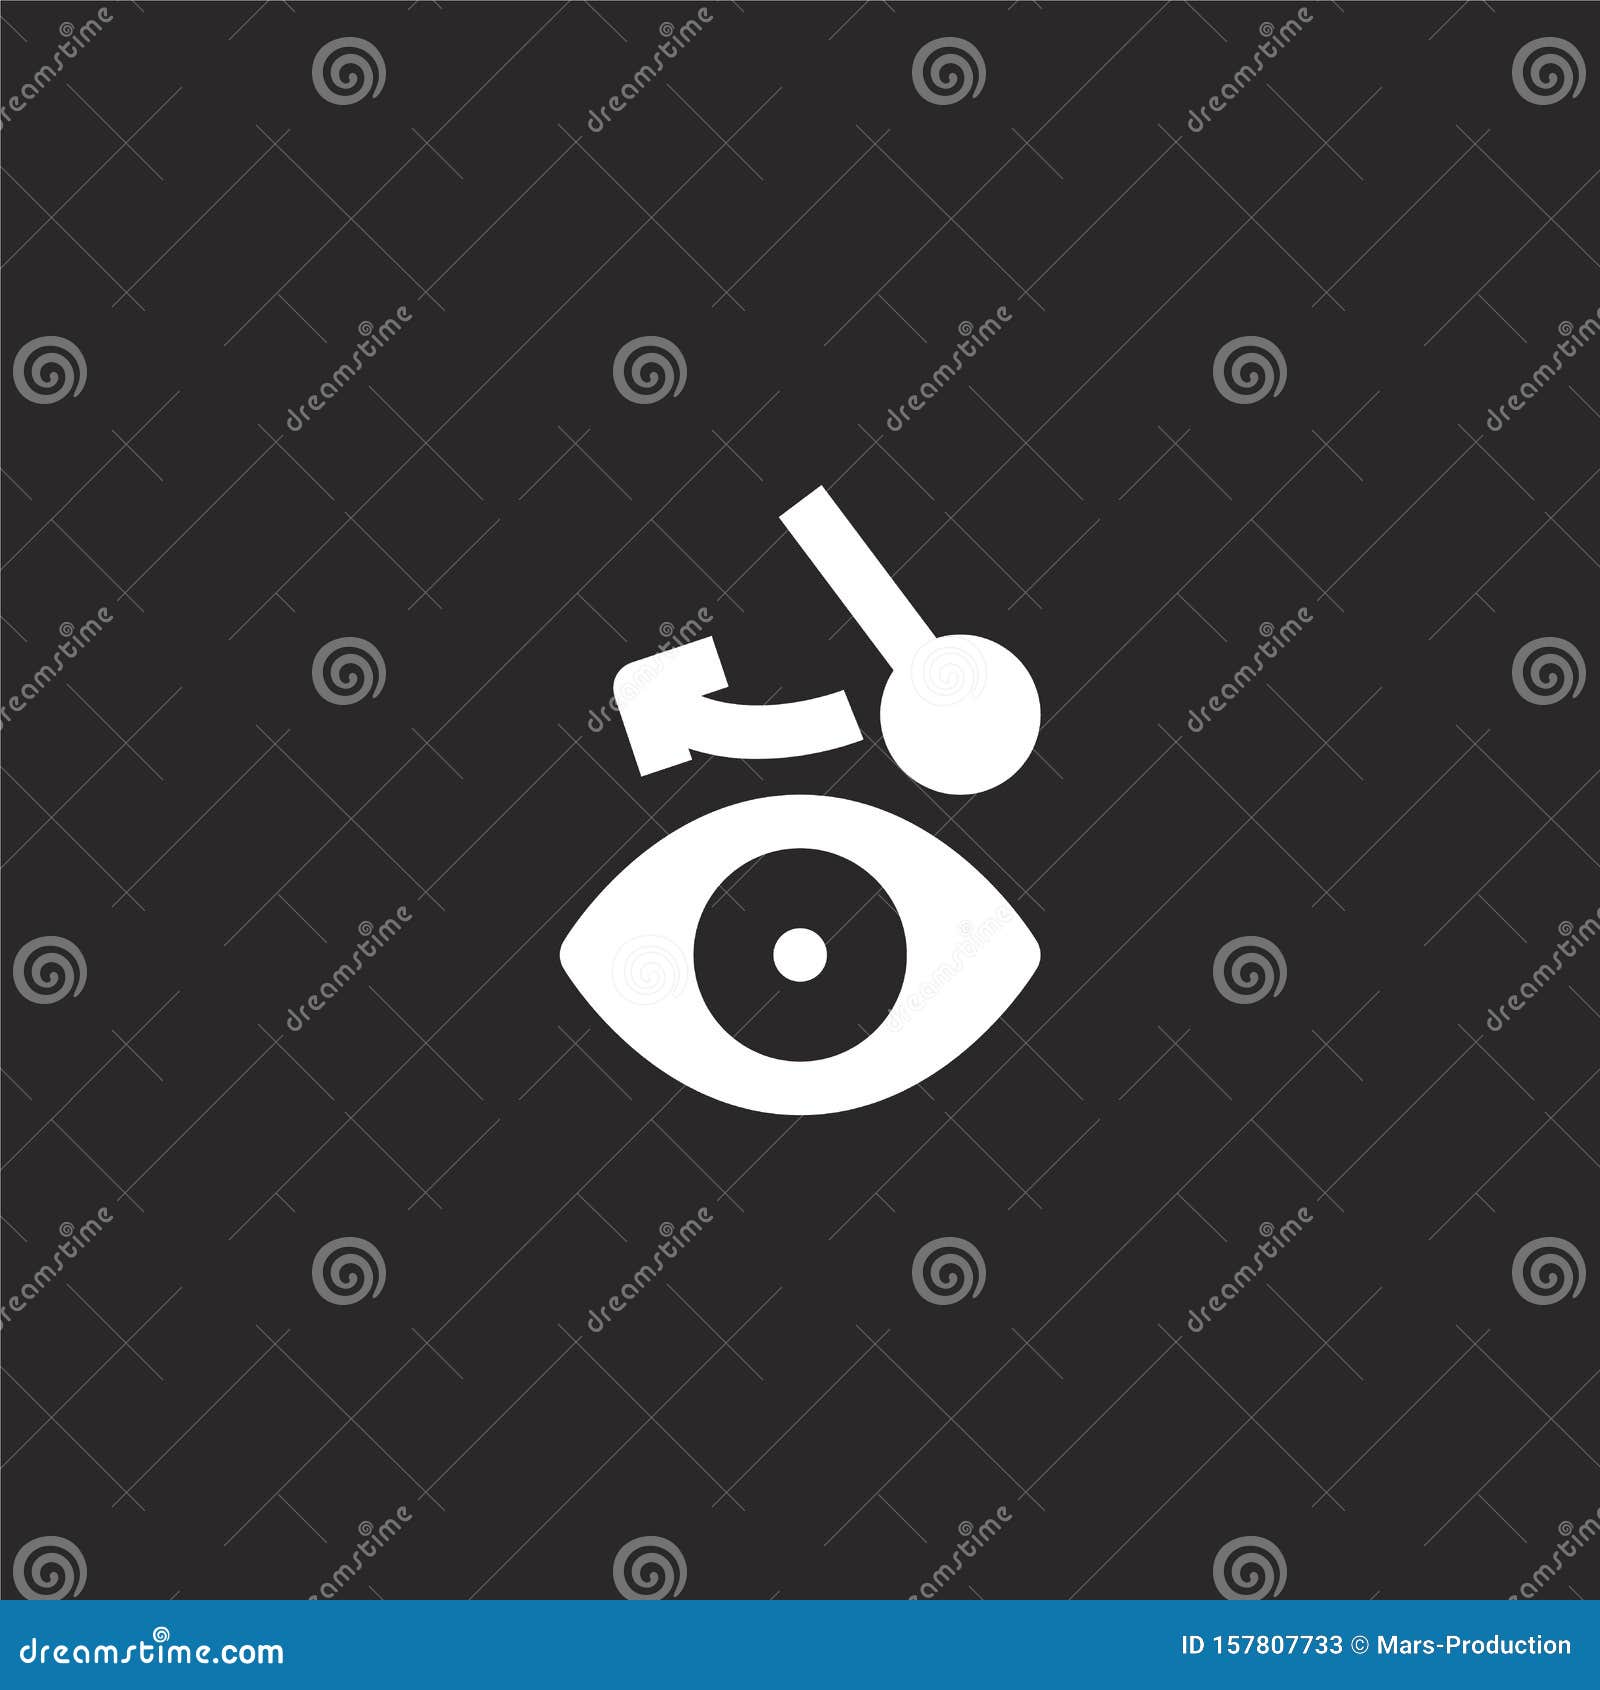 hypnotize icon. filled hypnotize icon for website  and mobile, app development. hypnotize icon from filled alternative